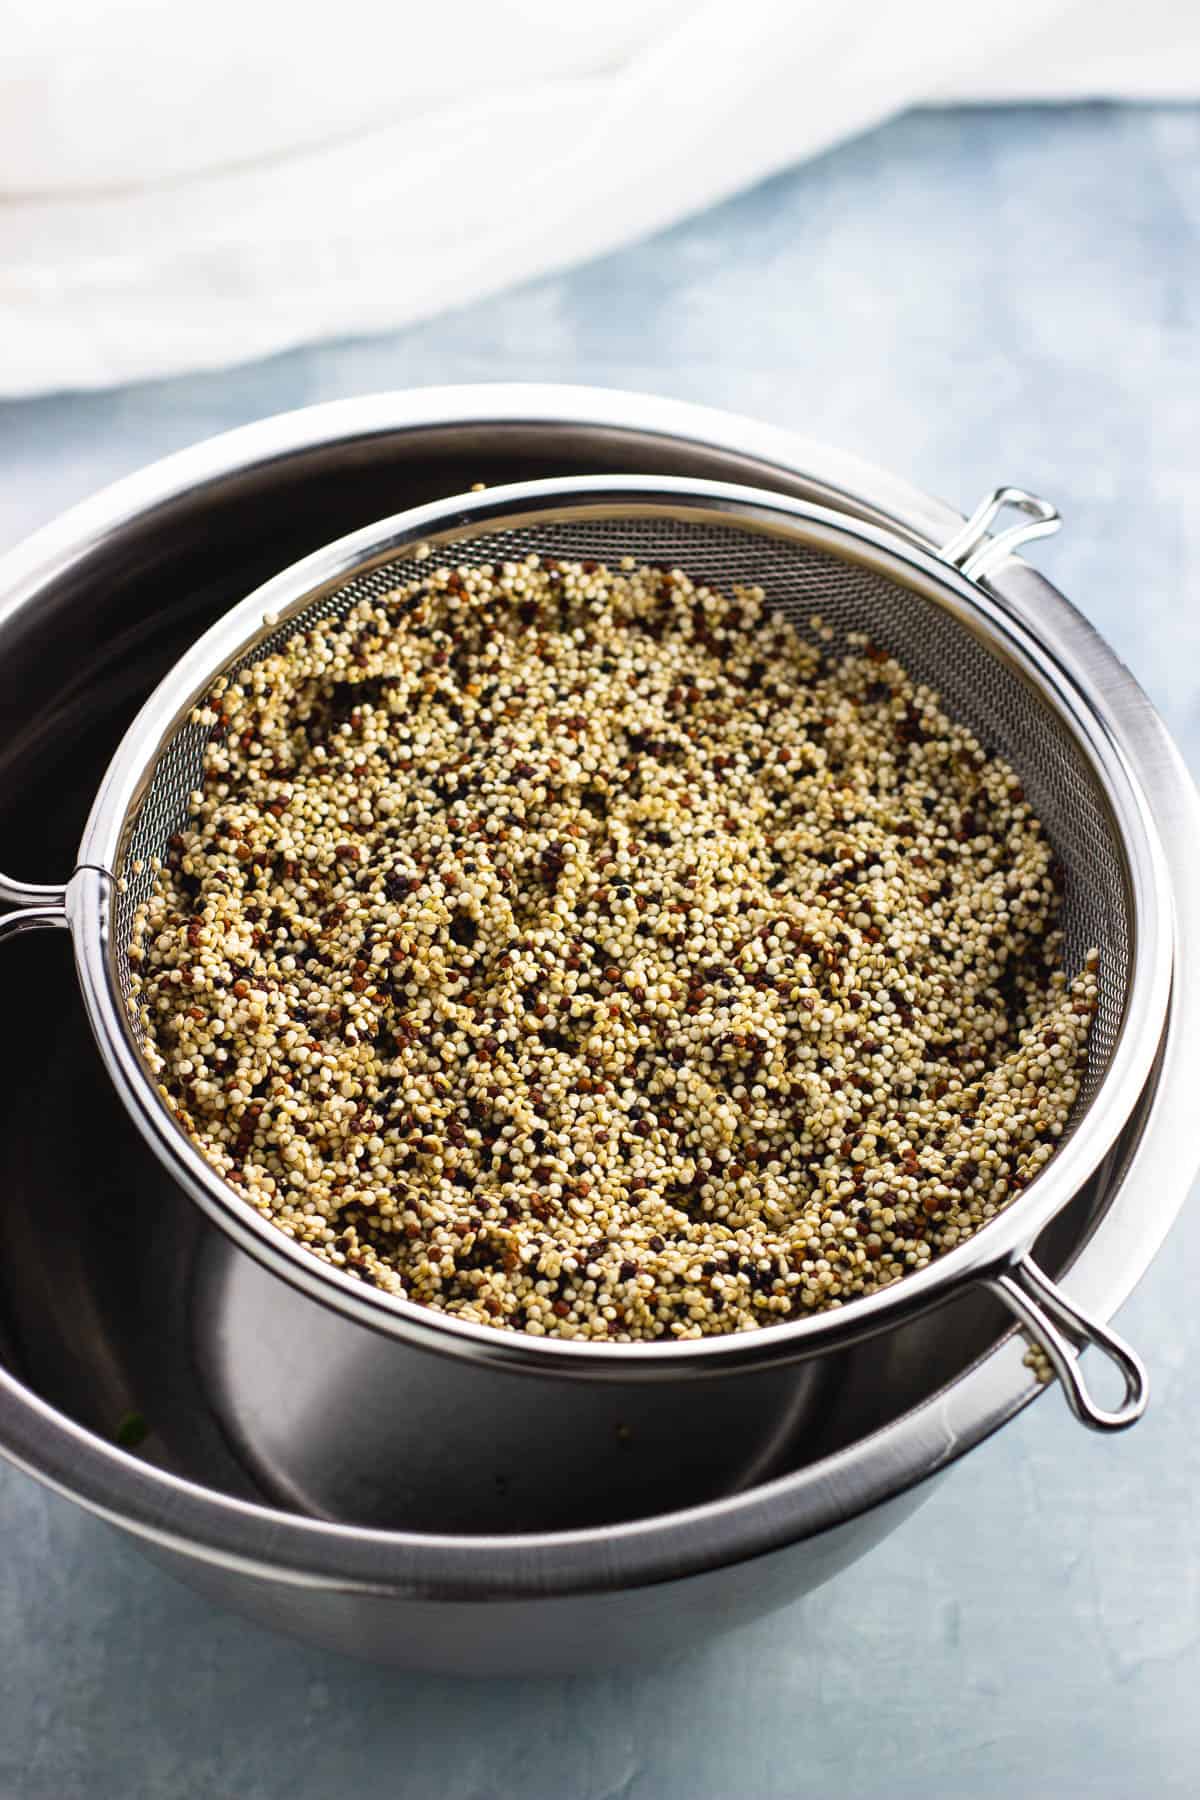 Rinsed quinoa in a large metal sieve set over a bowl.